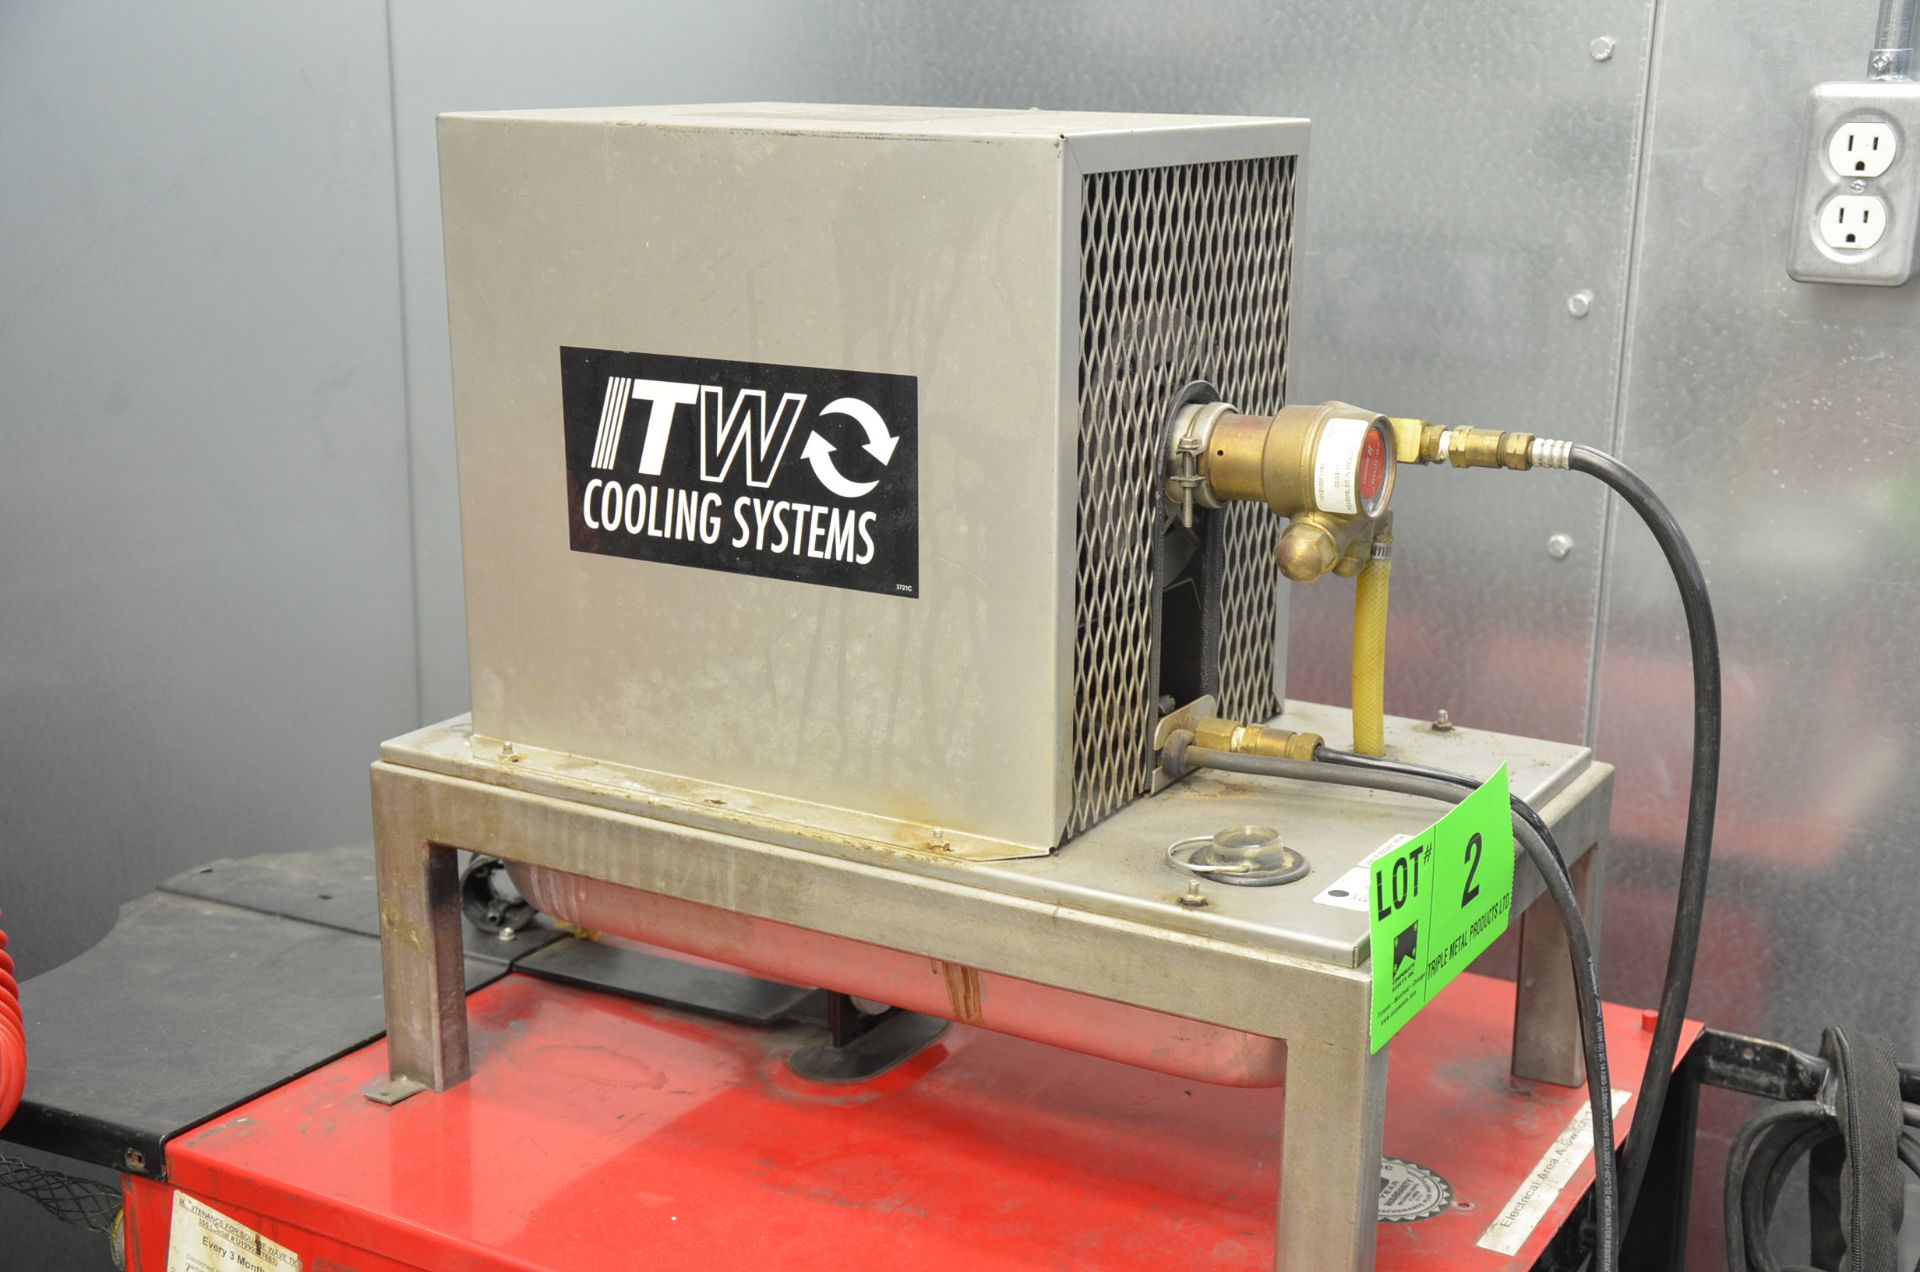 LINCOLN ELECTRIC SQUARE WAVE TIG-355 DIGITAL TIG WELDER WITH CABLES & GUN, ITW COOLING SYSTEMS - Image 4 of 4